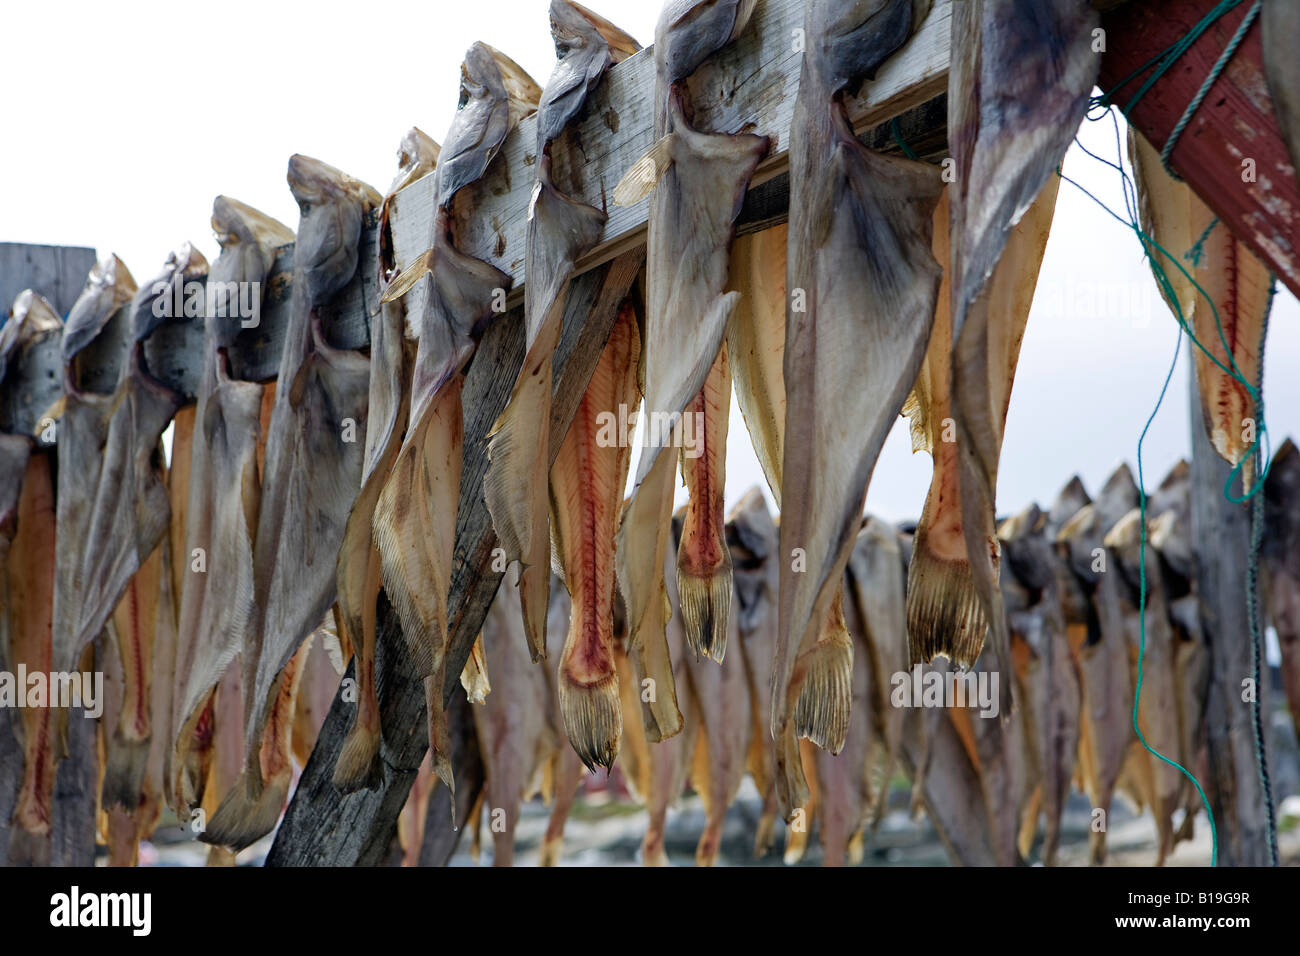 Greenland, West Greenland, Oqaatsut / Rodebay.Halibut dries in the air in this remote hunting and fishing village. Stock Photo